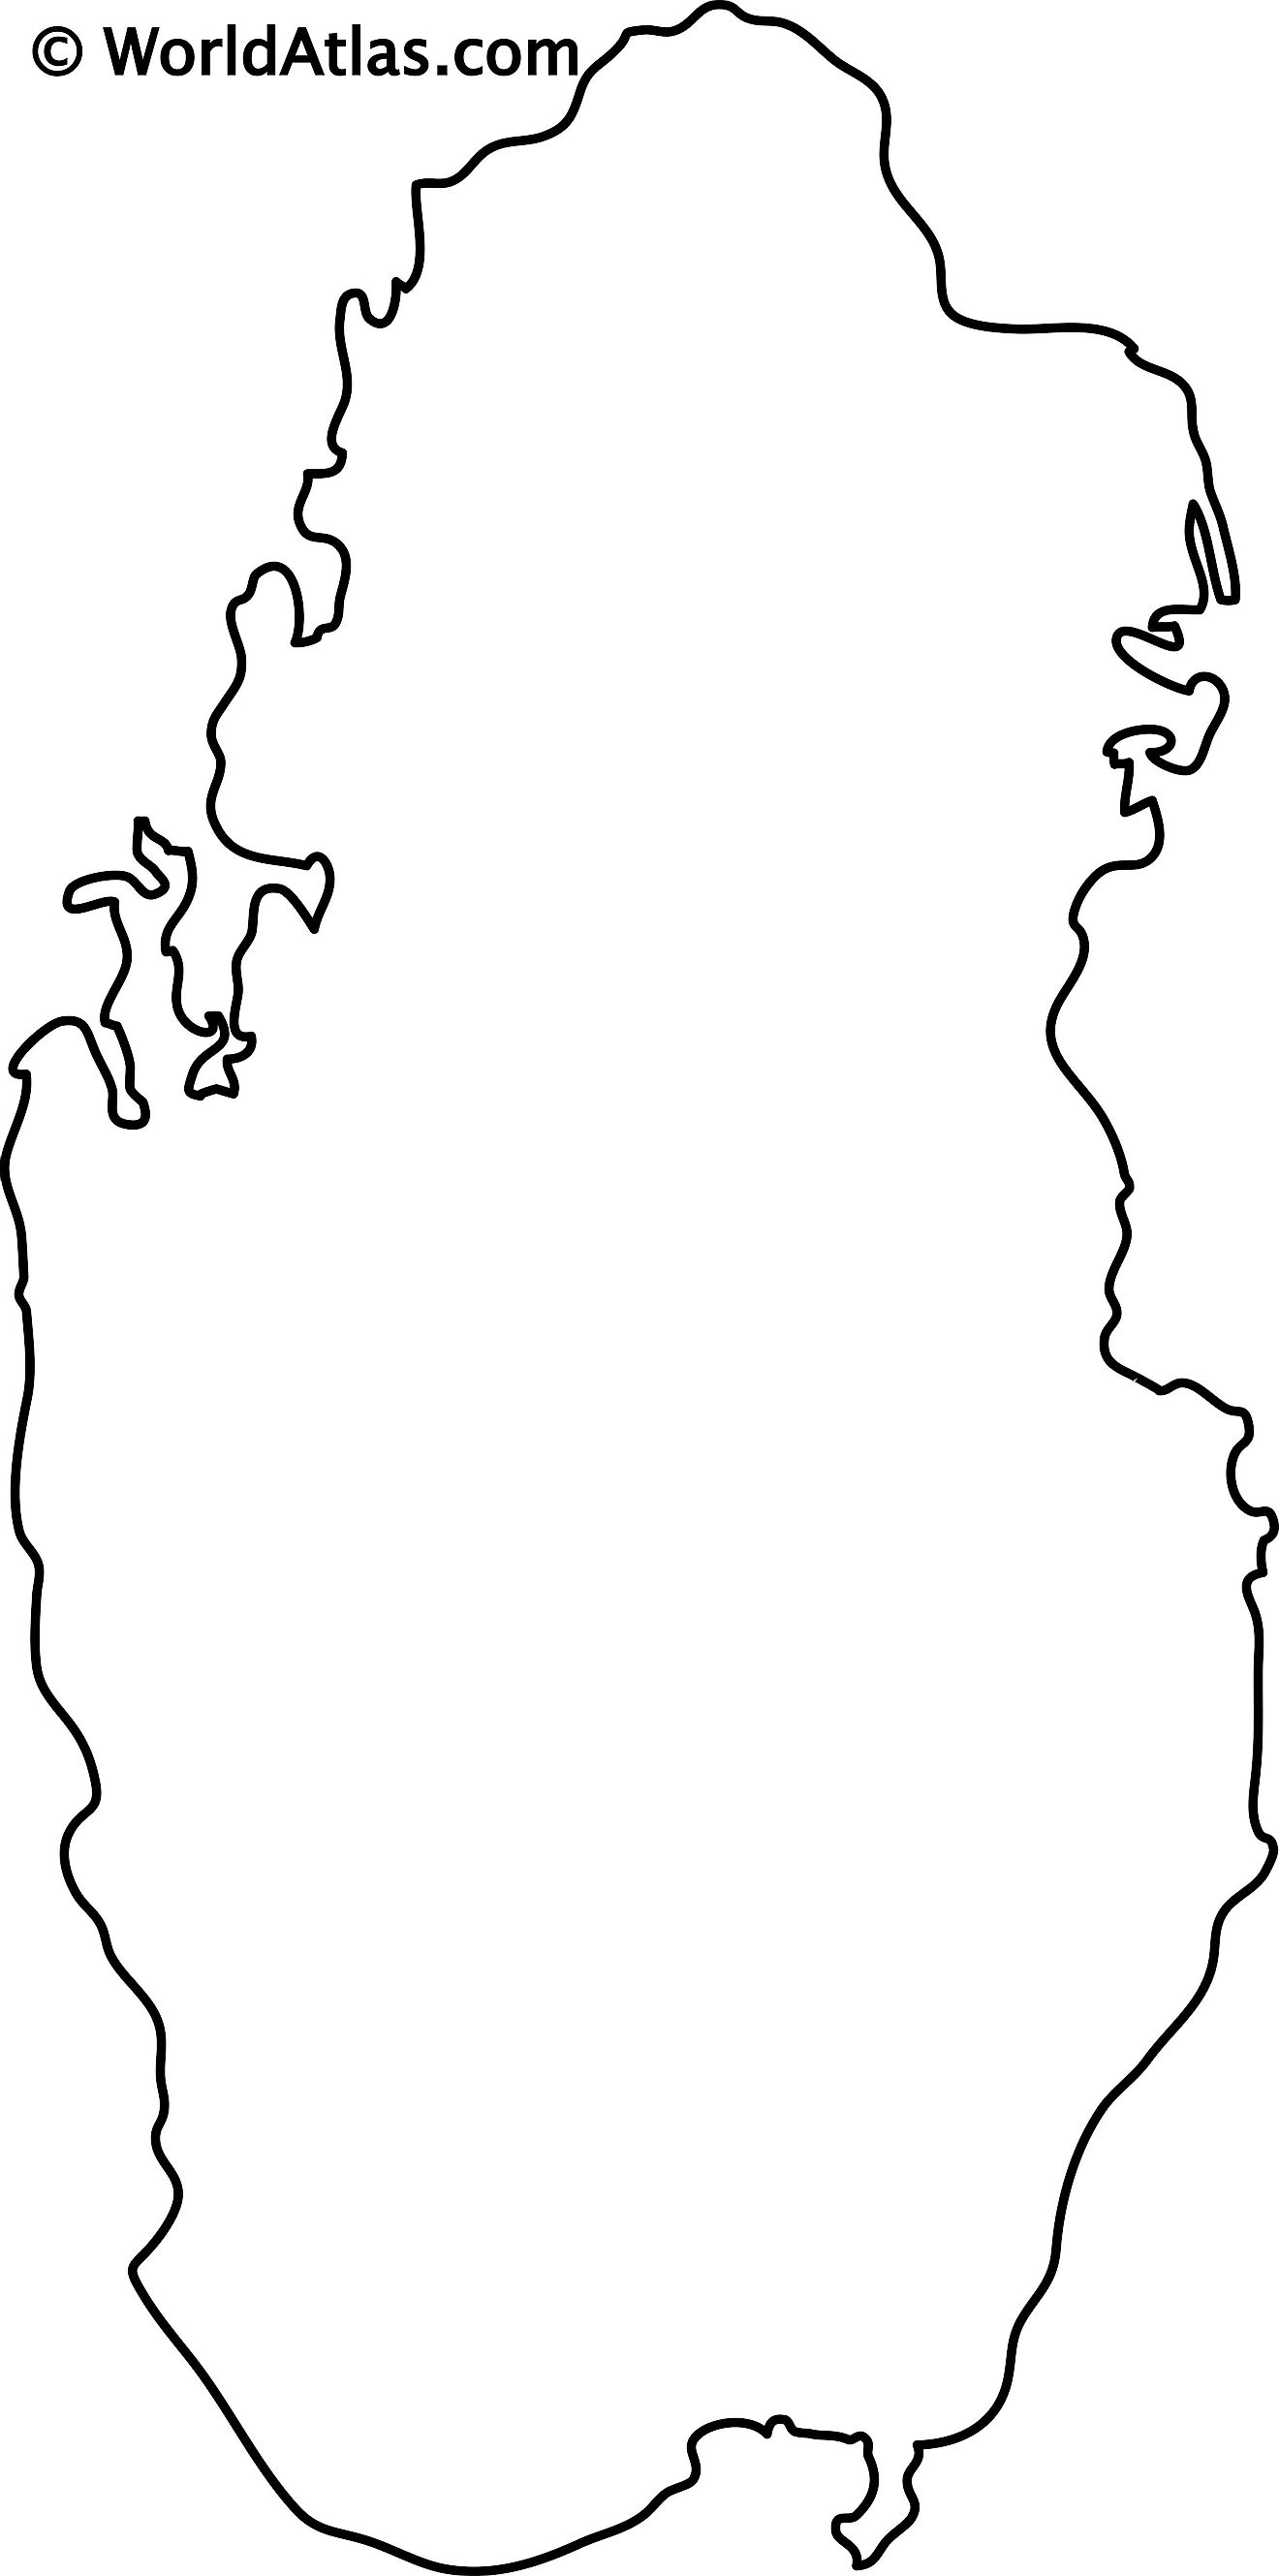 Blank Outline Map of Qatar